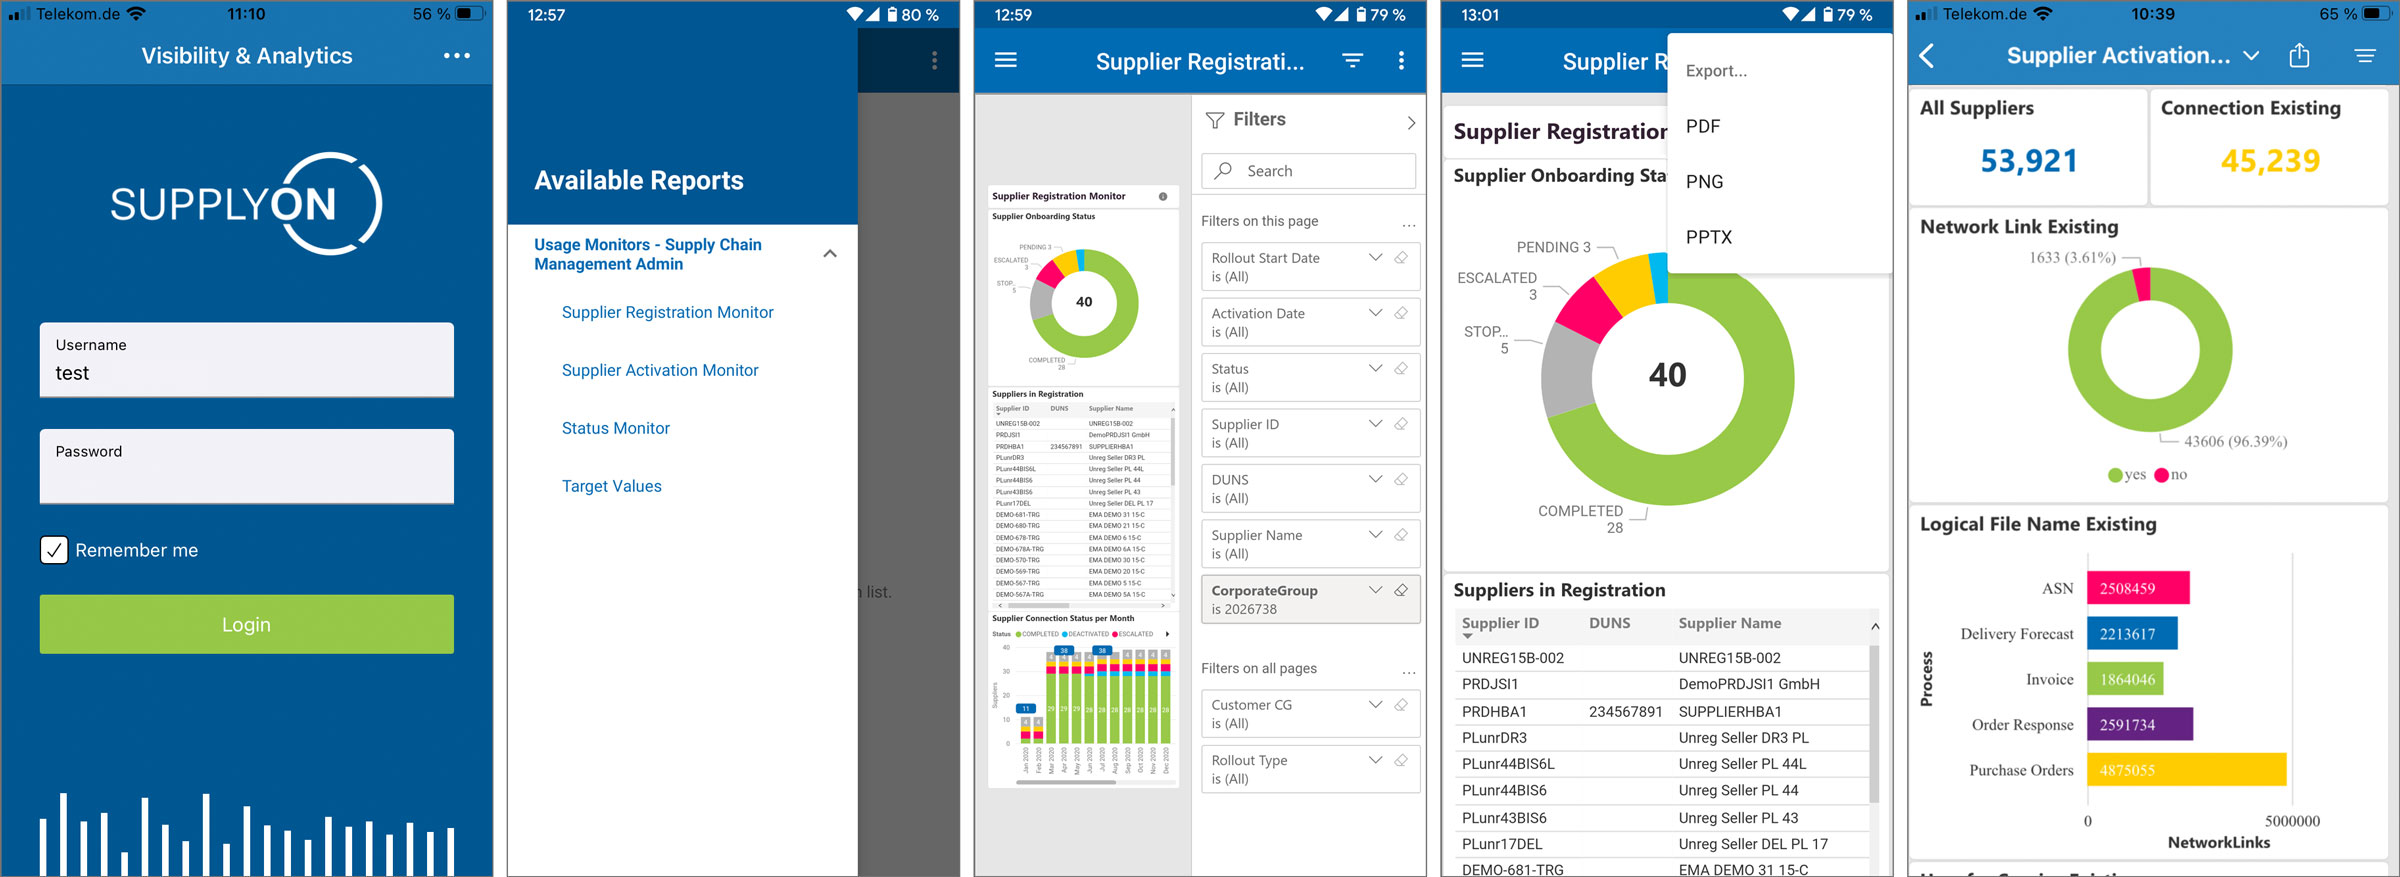 All relevant information at a glance: The new SupplyOn mobile app provides you with an easy-to-use 24/7 access to your Visibility & Analytics dashboard, no matter where you are